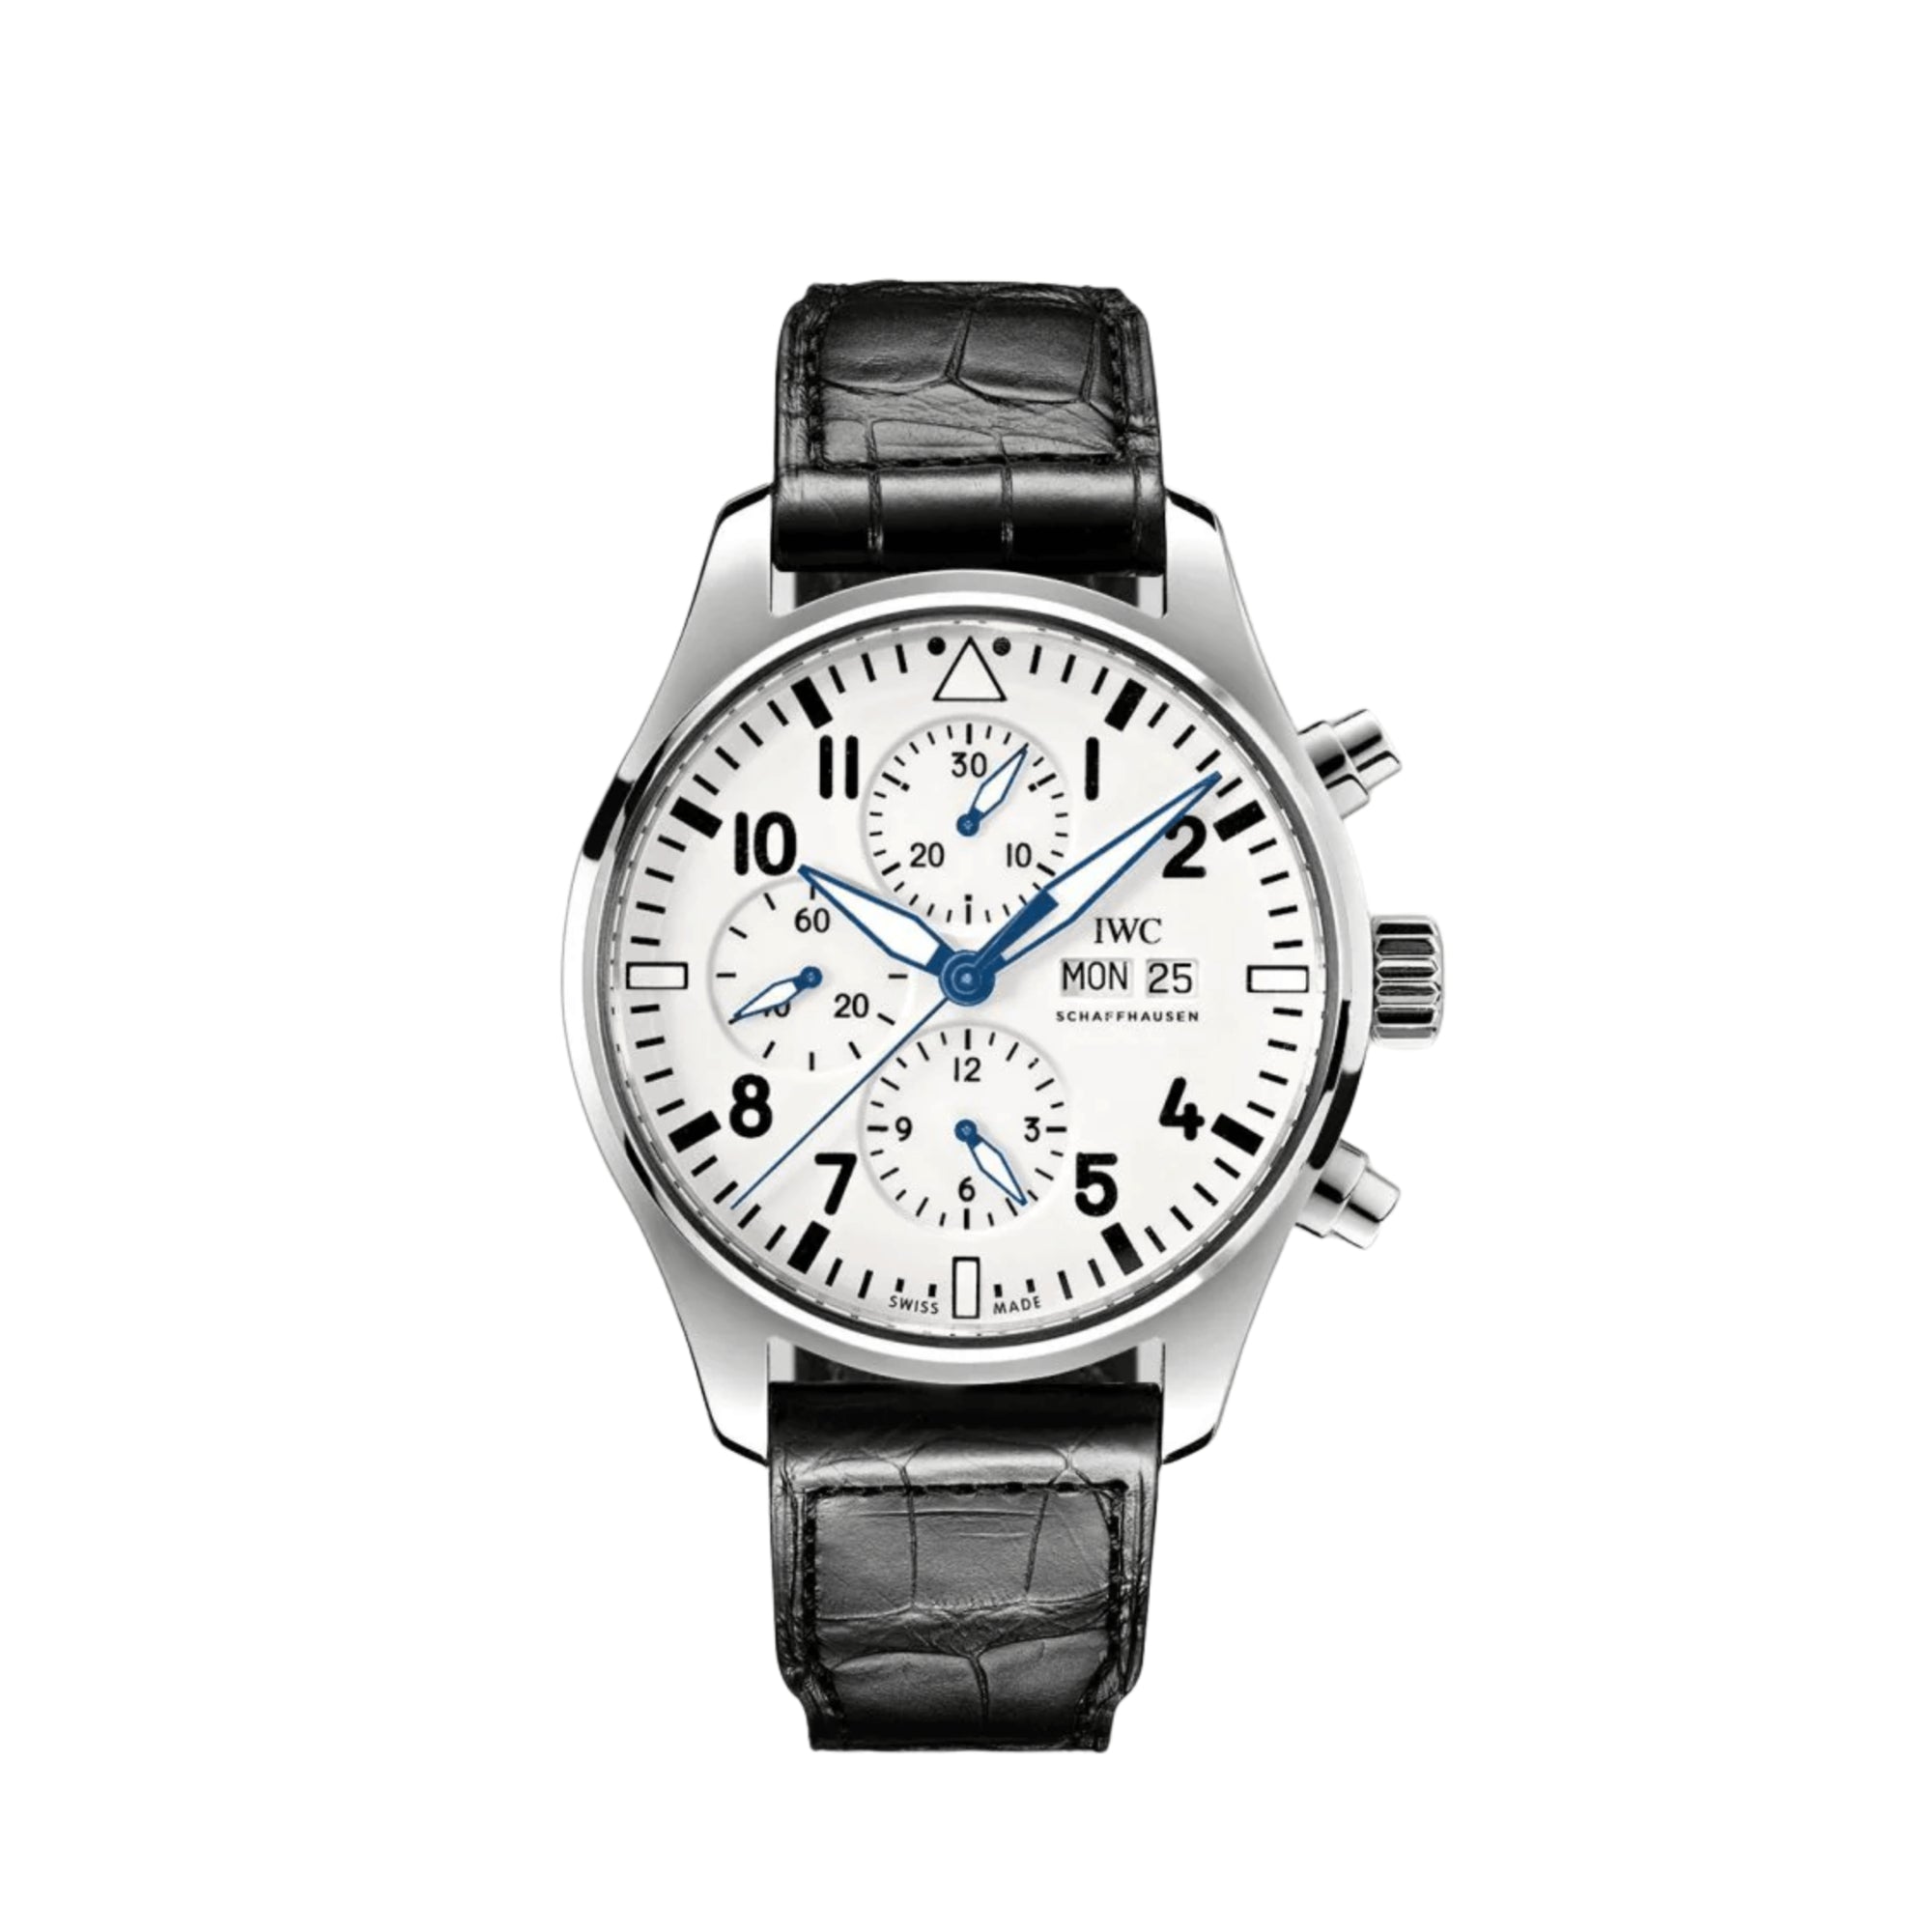 IWC Pilot Chronograph Edition "150 Years" White Dial Black Leather 43mm